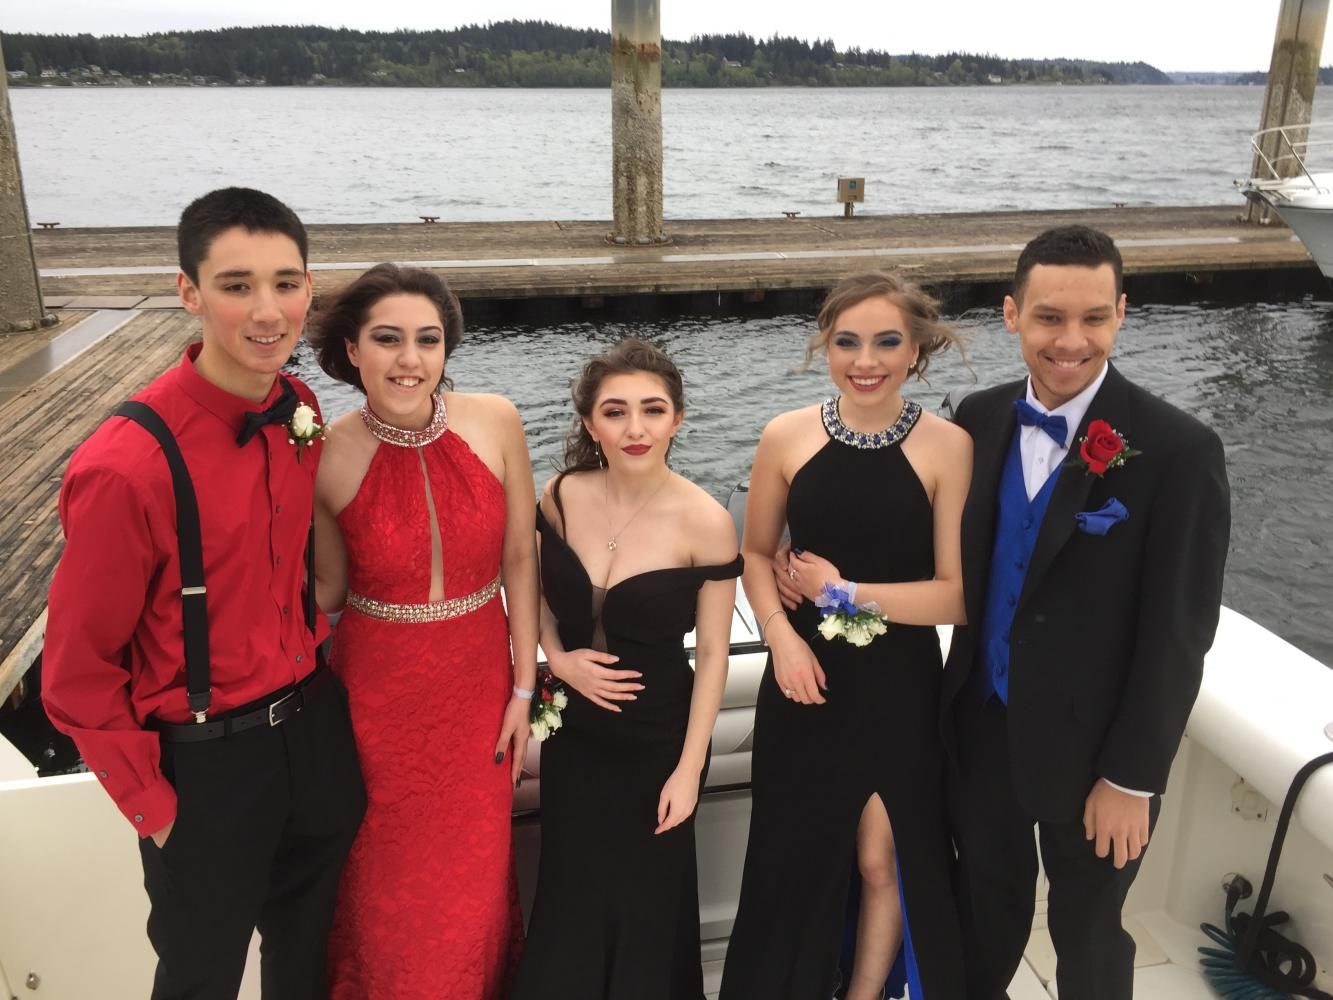 Seniors Cody Spiegel, Kaileigh Davila, Karlee Weninger, and Kendall Washington, with junior Adaleana Hunter on a boat at the Silverdale waterfront trying to not get blown away by the wind. 